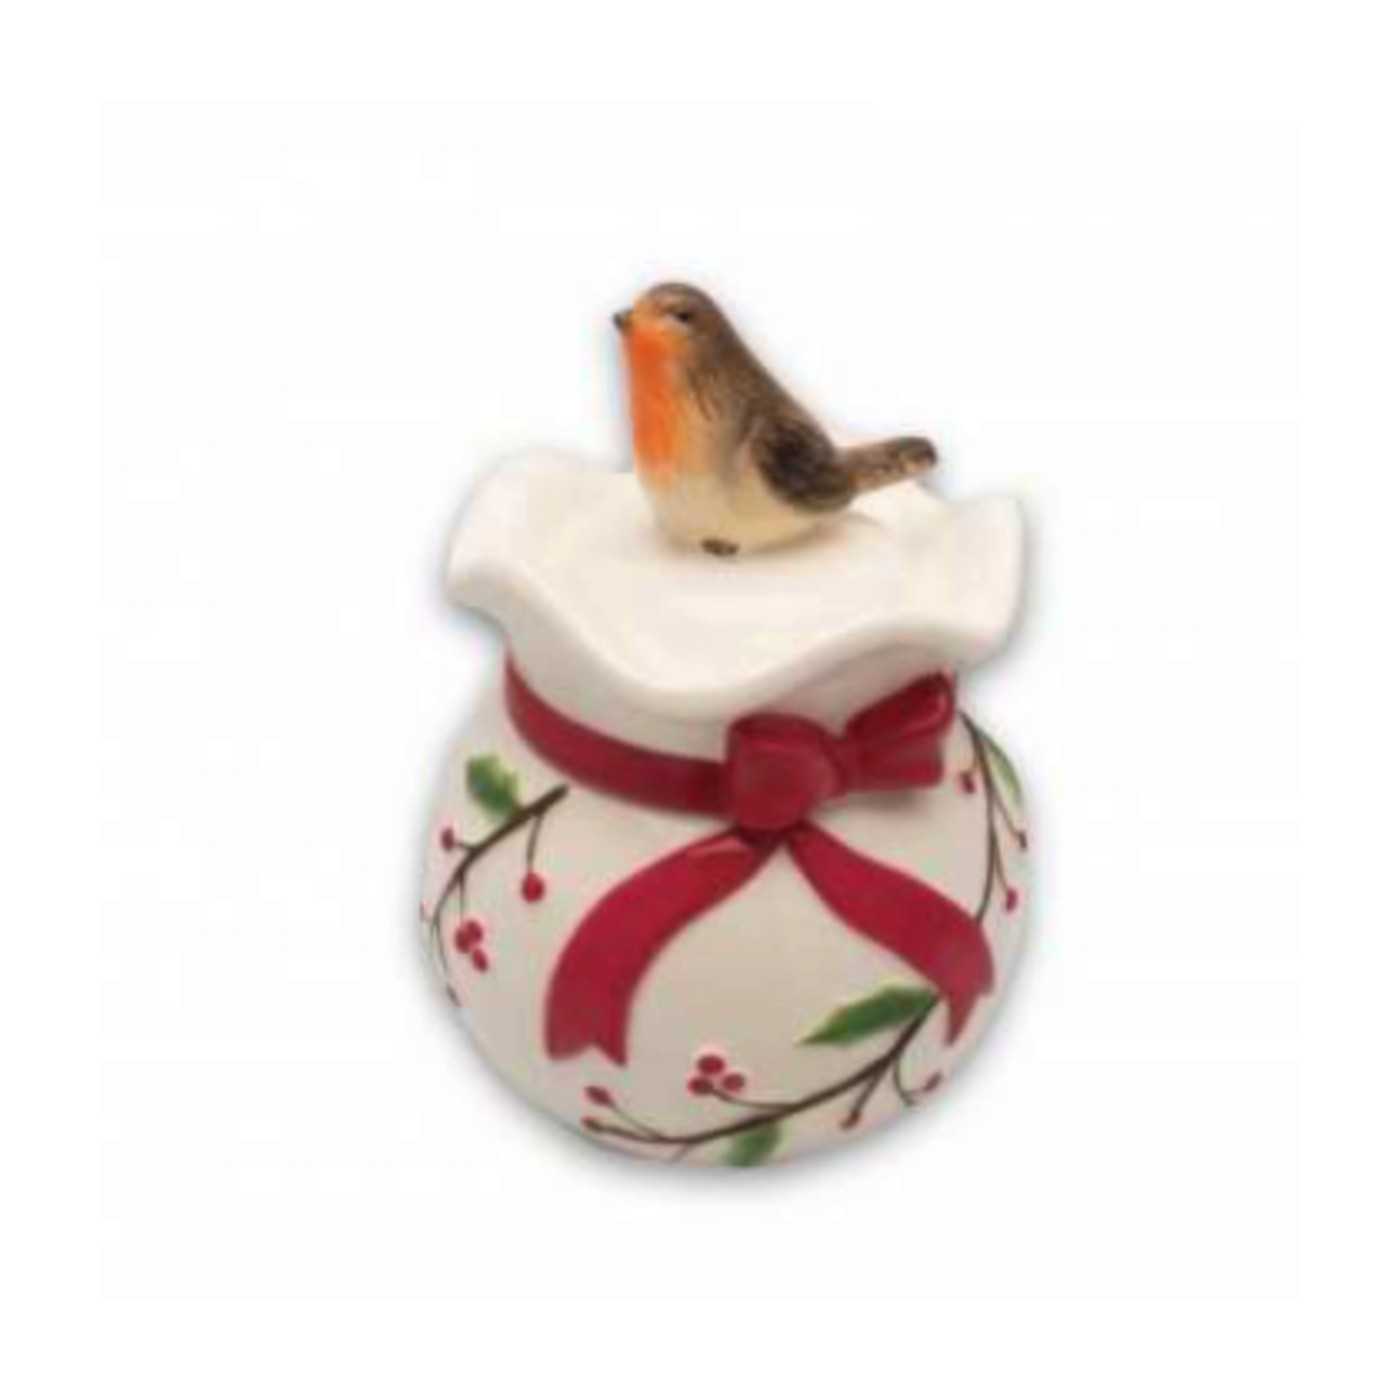 Ceramic Robin and Berries with a Bow Jar 150g 6st